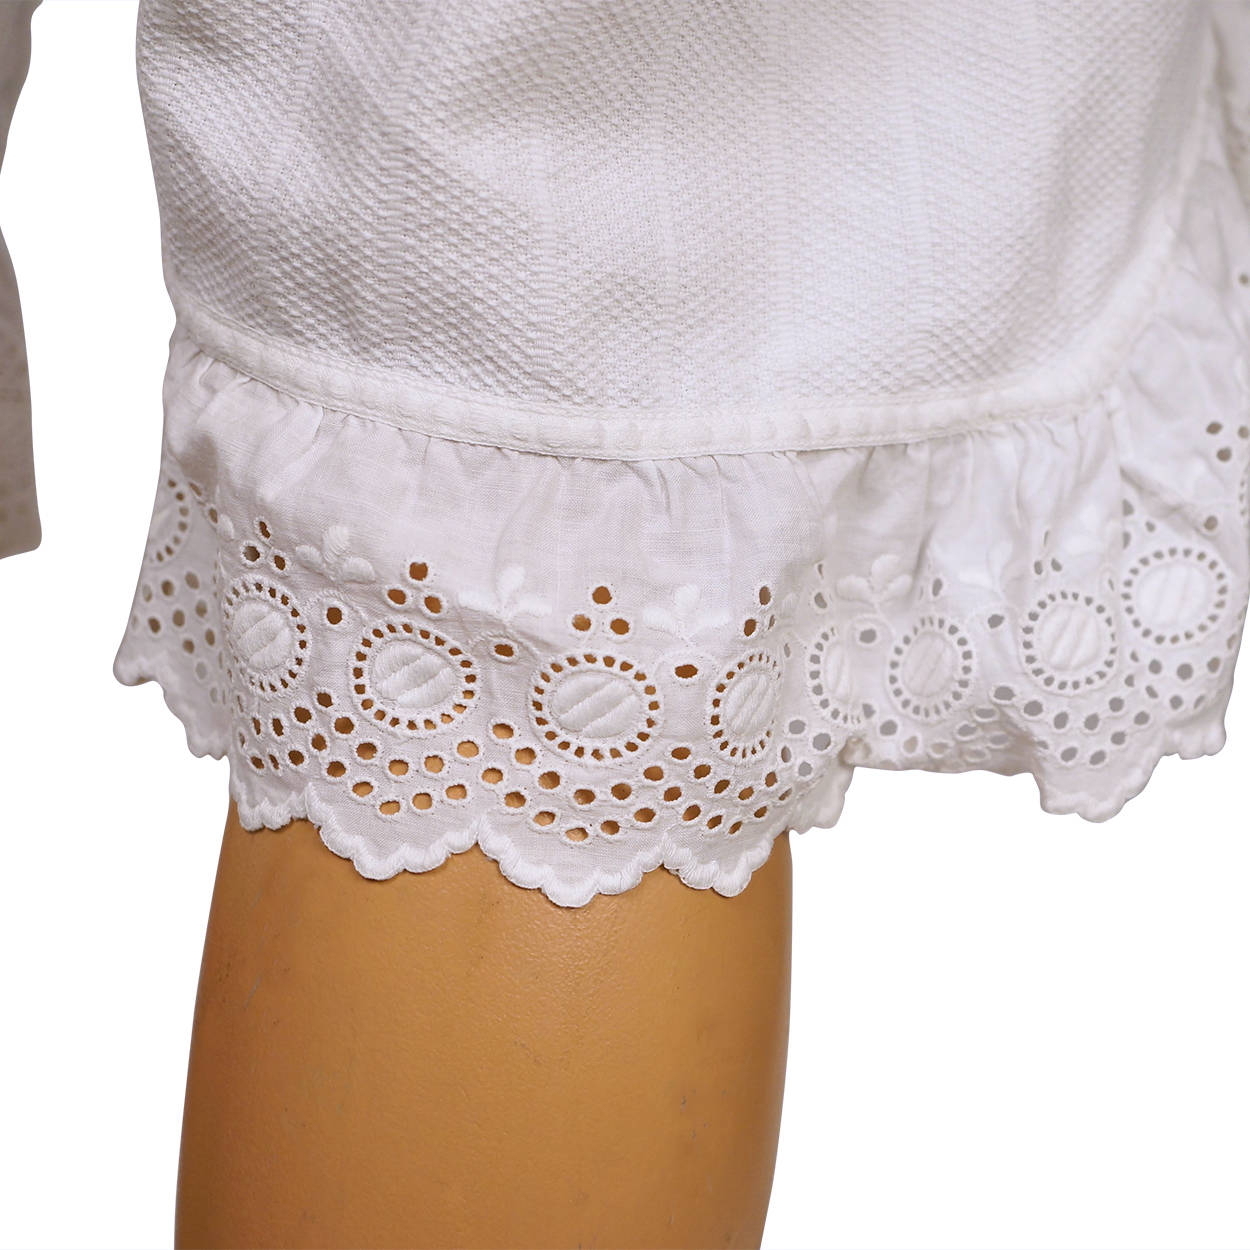 Antique Victorian White Woven Cotton Drawers with Eyelet Trim Ladies ...